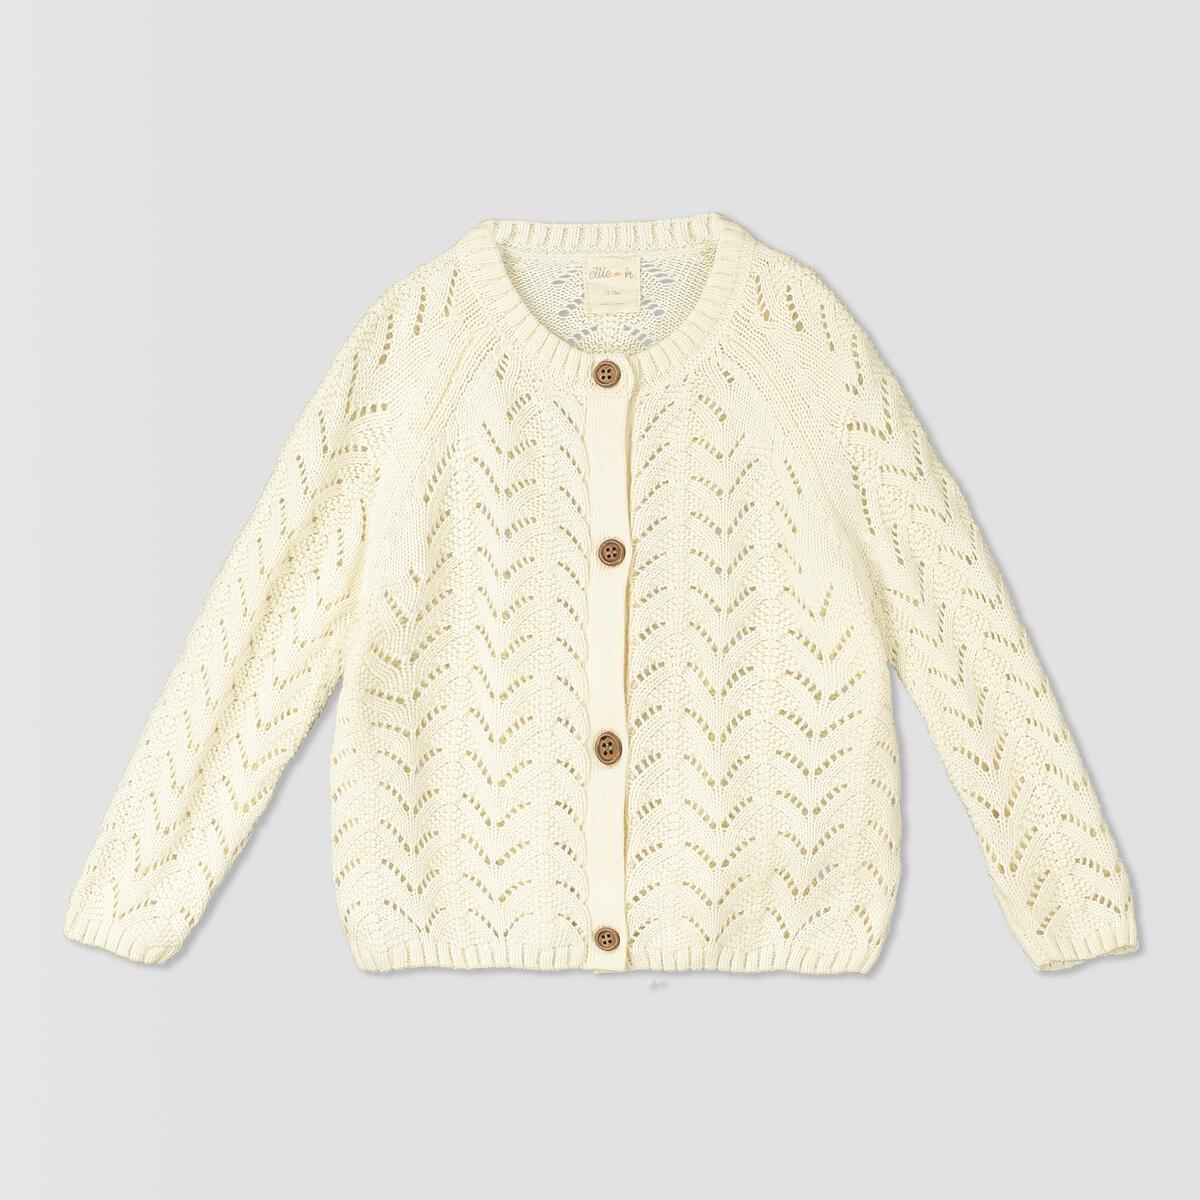 This Ivory Talwyn Sweater is the perfect layering piece. This darling cable knit design is a staple in any little's wardrobe!   100% Cotton. 